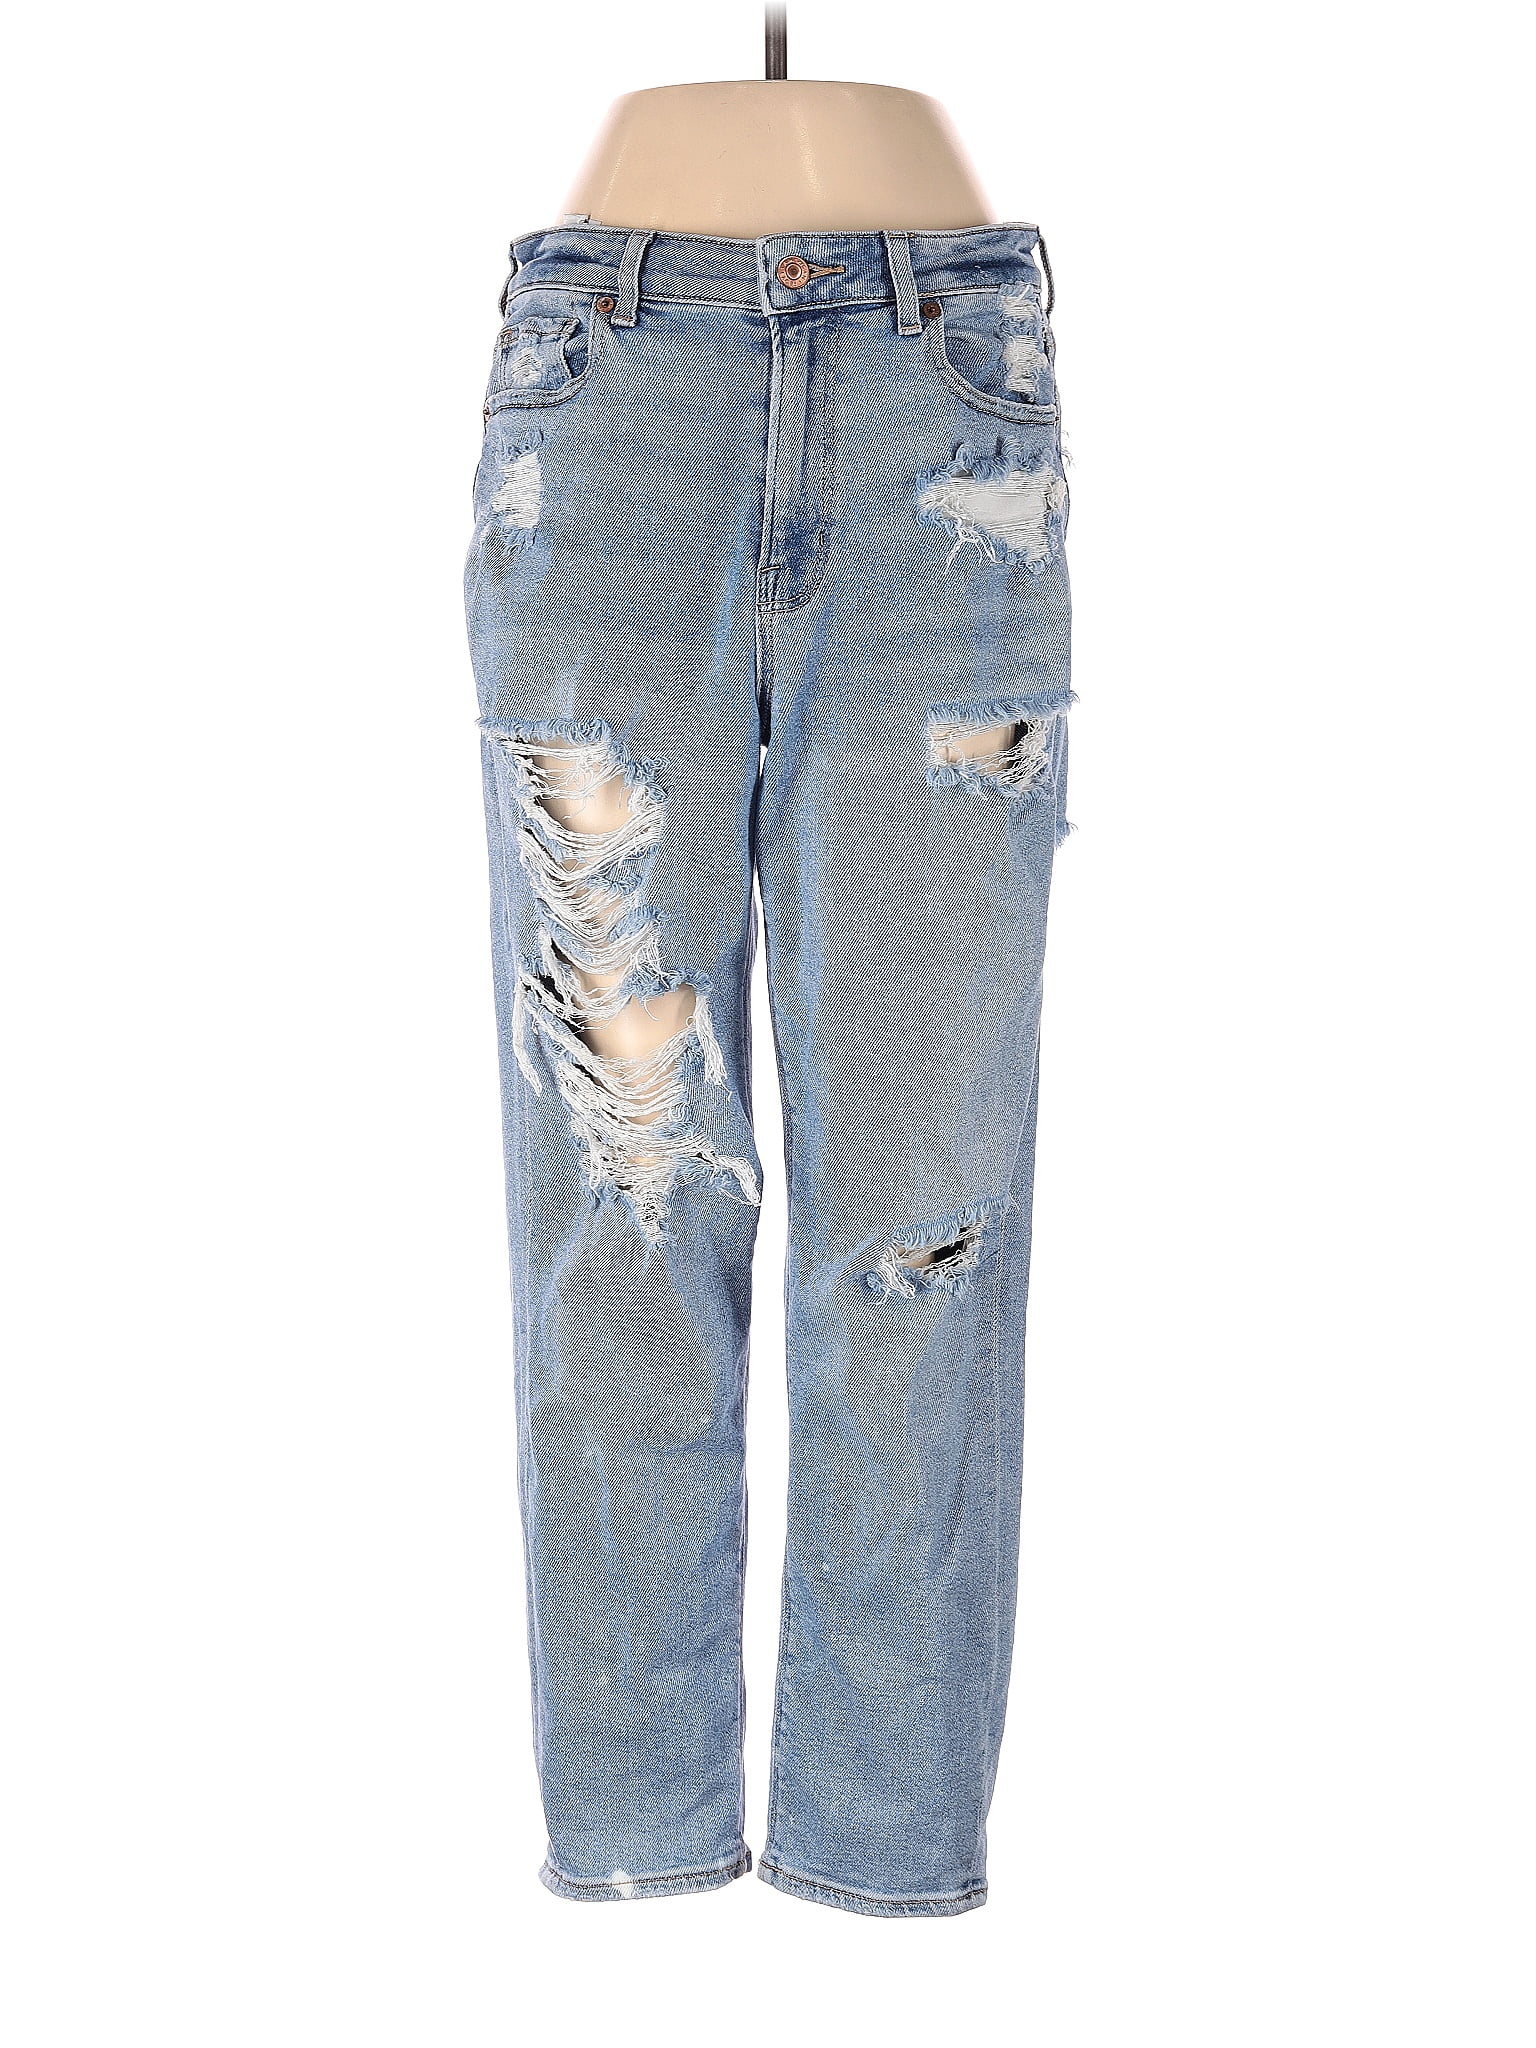 American Eagle Outfitters, Jeans, American Eagles Jeans De Mujer Azul  Talla 33